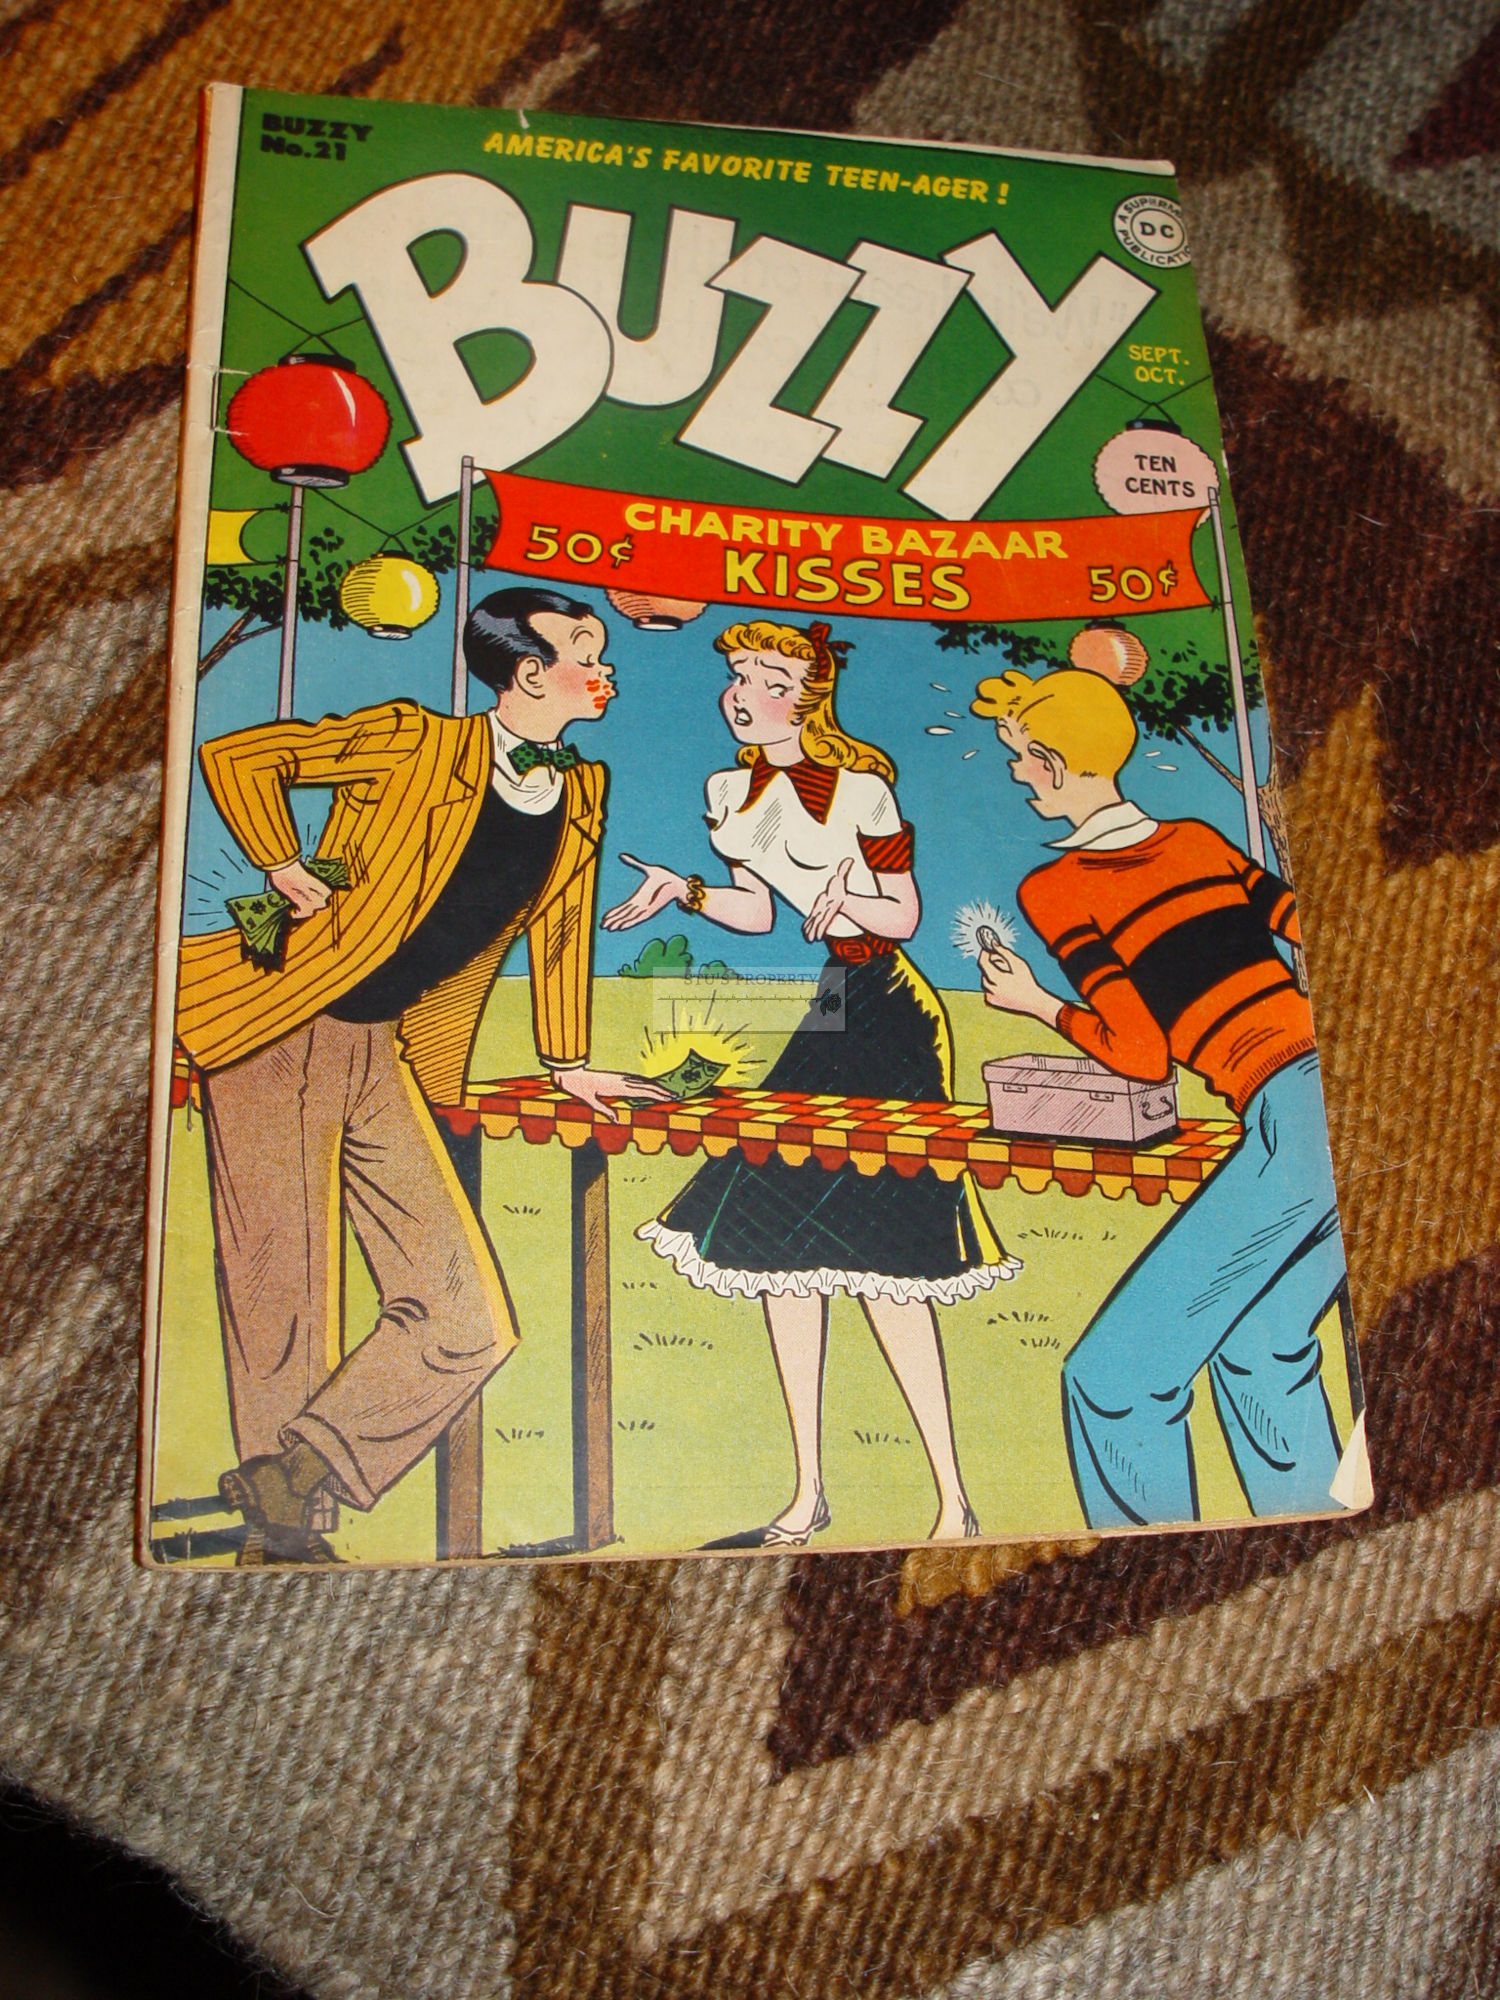 Buzzy 1948 (Archie) #21 National Comics -
                        Very nice